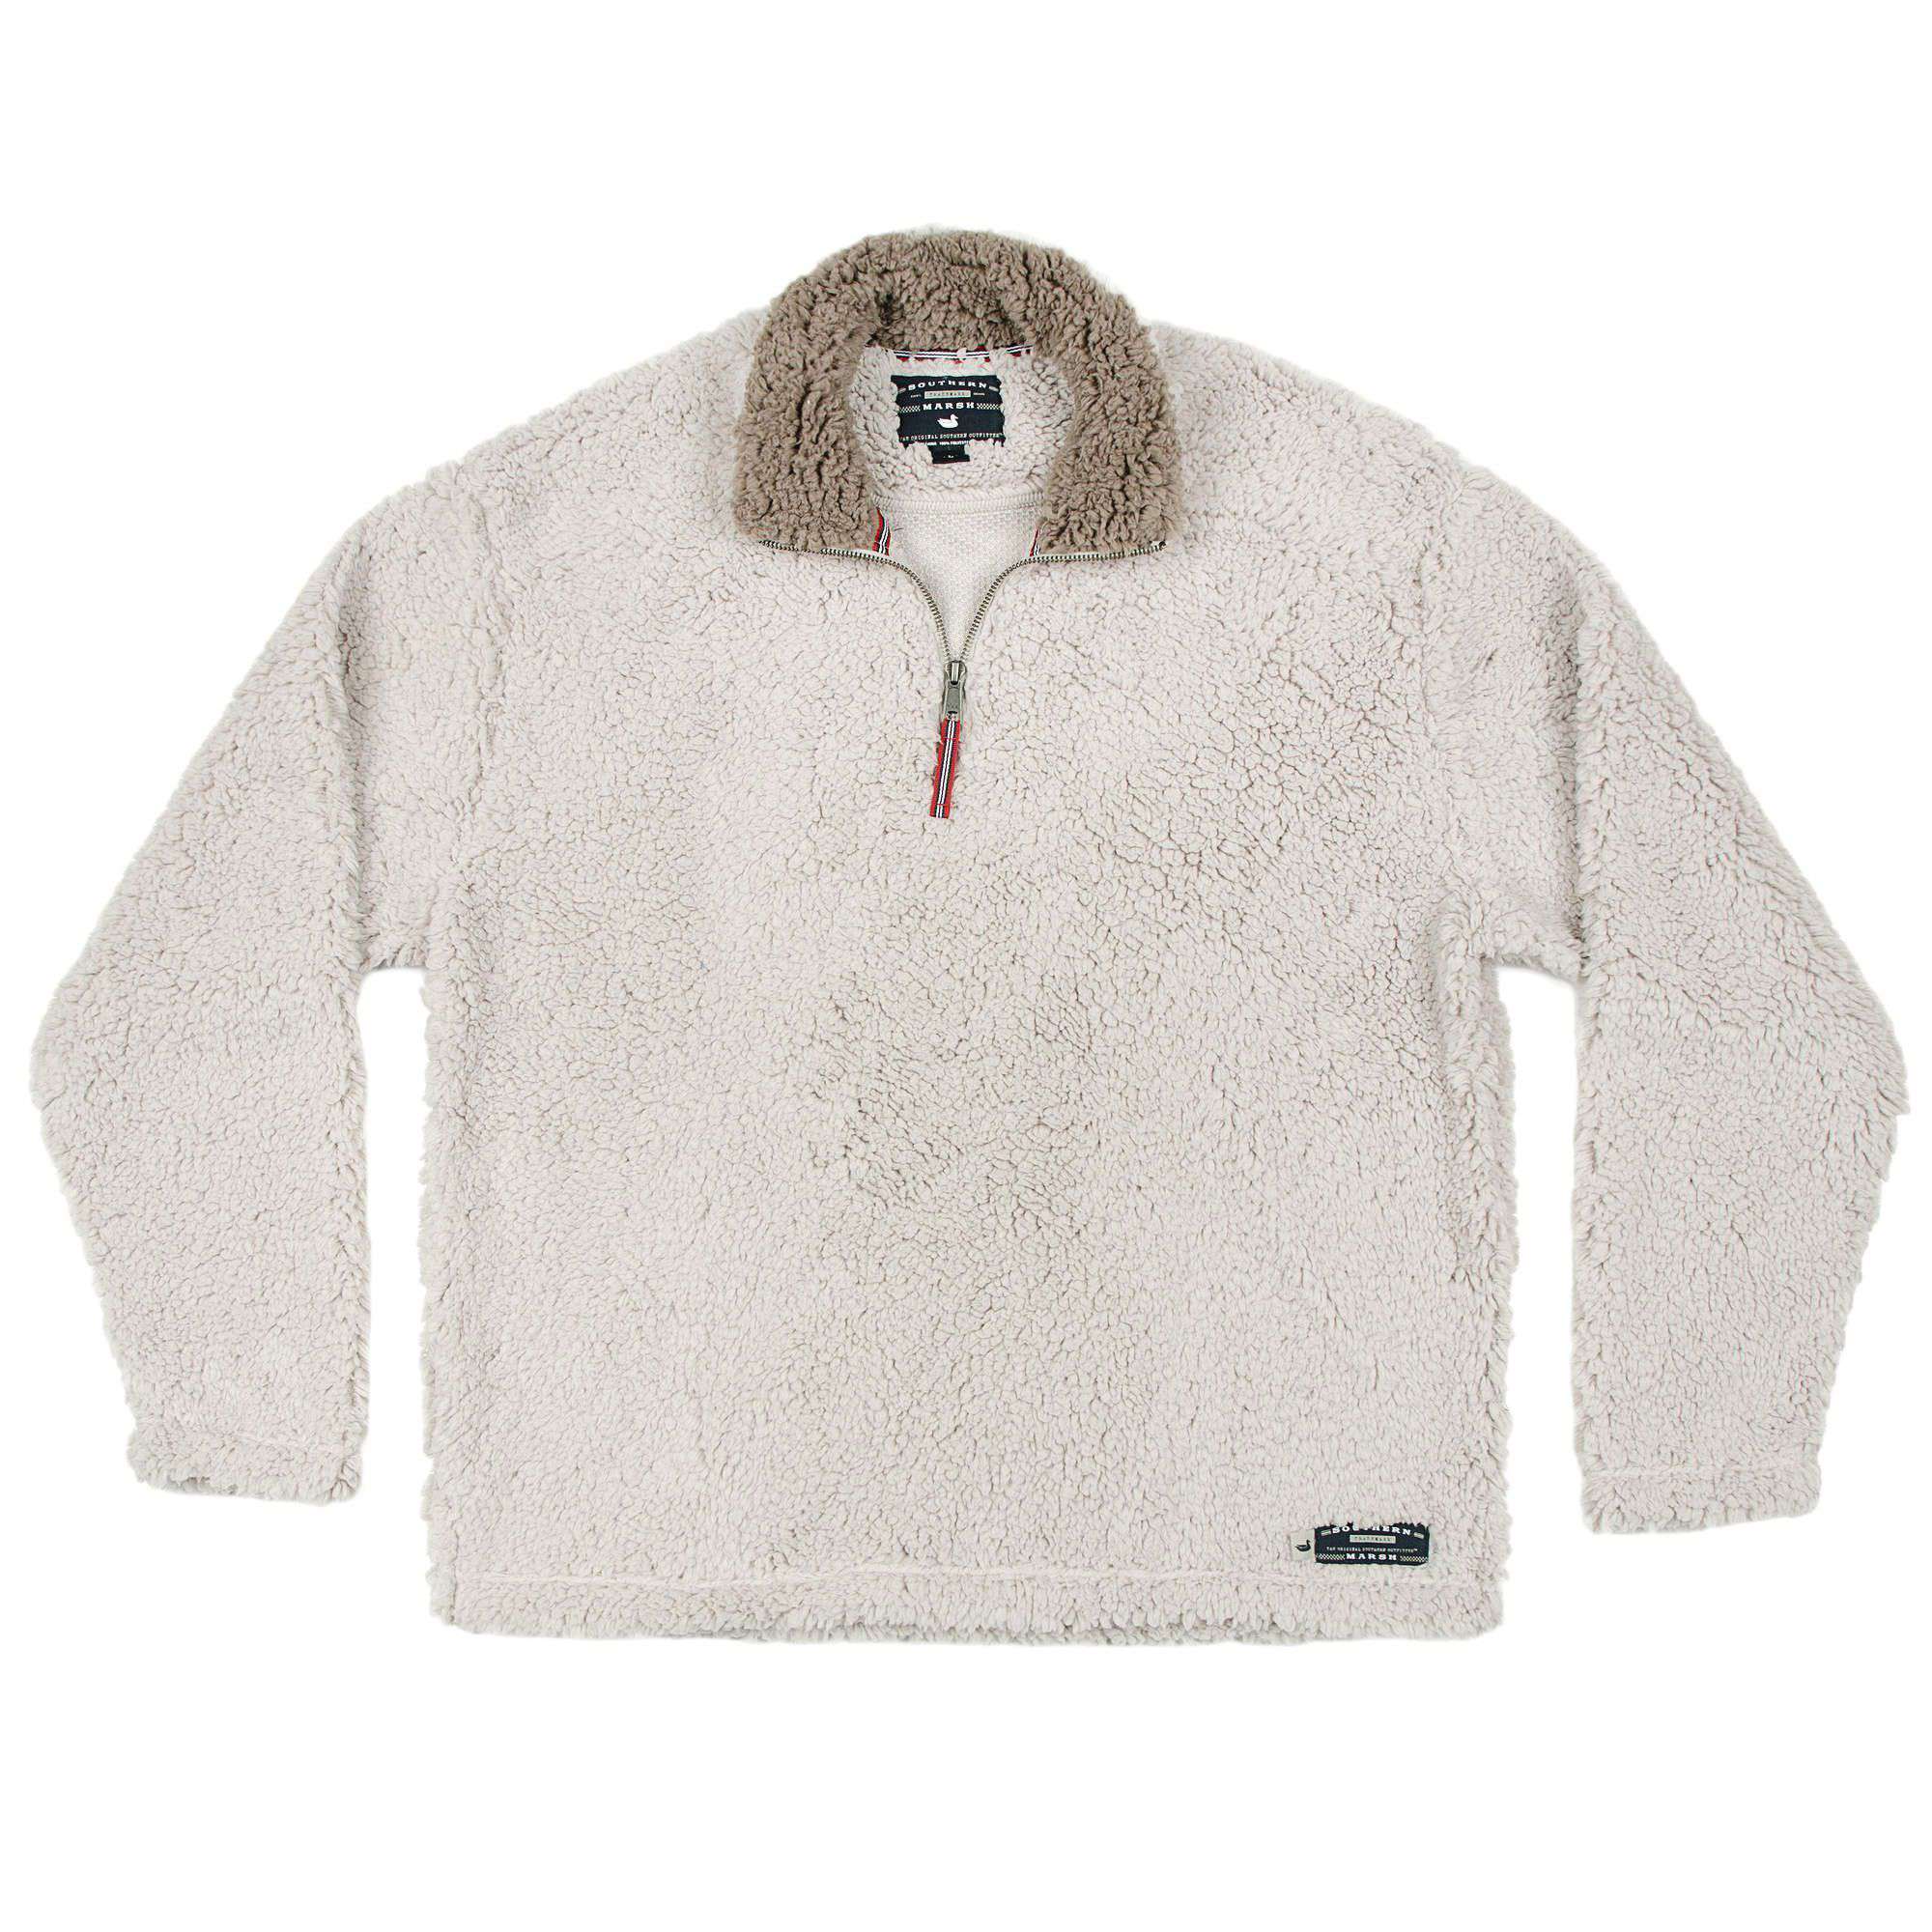 Appalachian Pile Pullover 1/4 Zip in Oatmeal by Southern Marsh - Country Club Prep